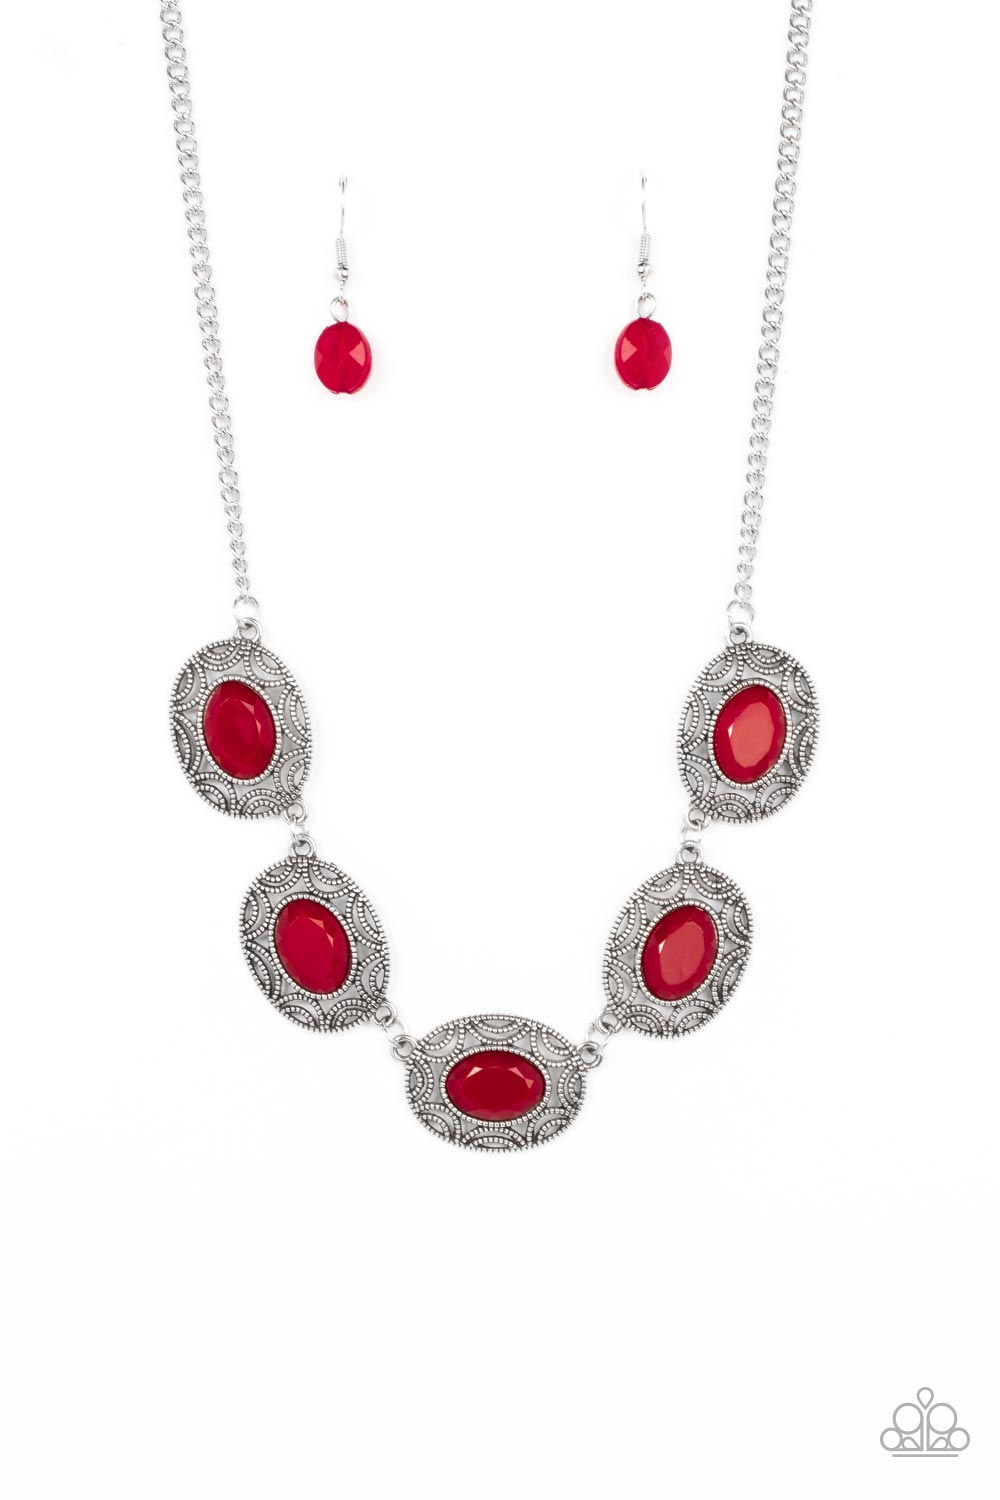 Paparazzi ♥ Radiant Reflections - Red ♥ Necklace – LisaAbercrombie